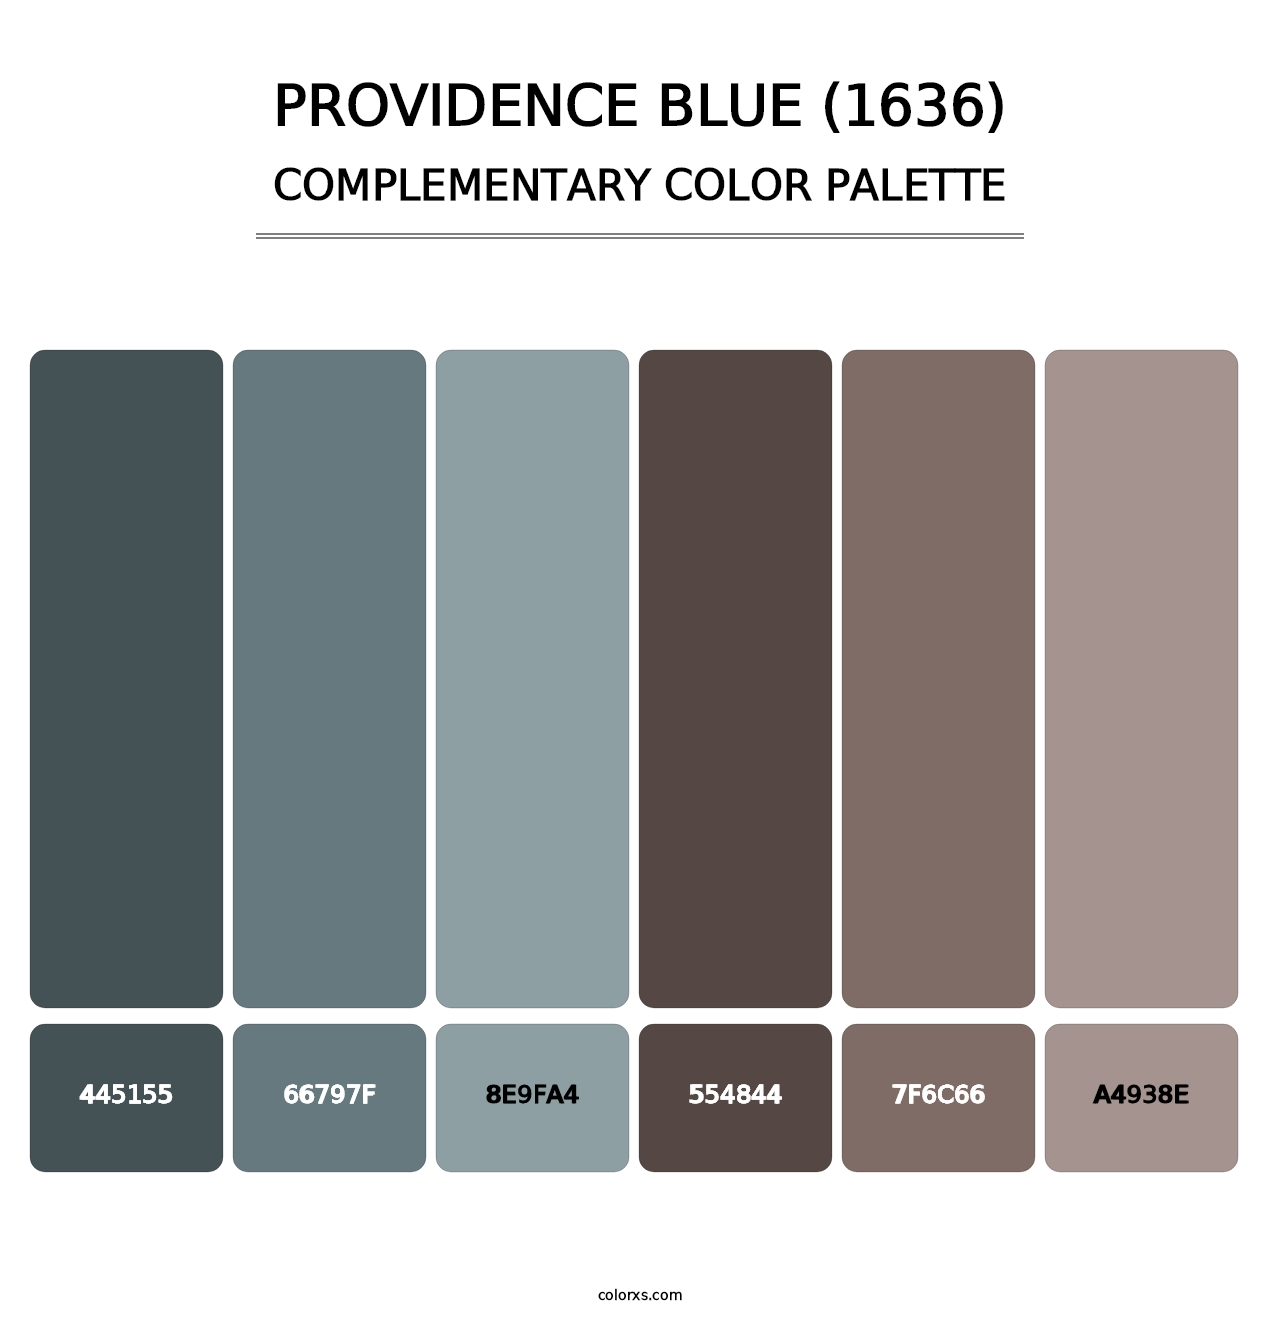 Providence Blue (1636) - Complementary Color Palette